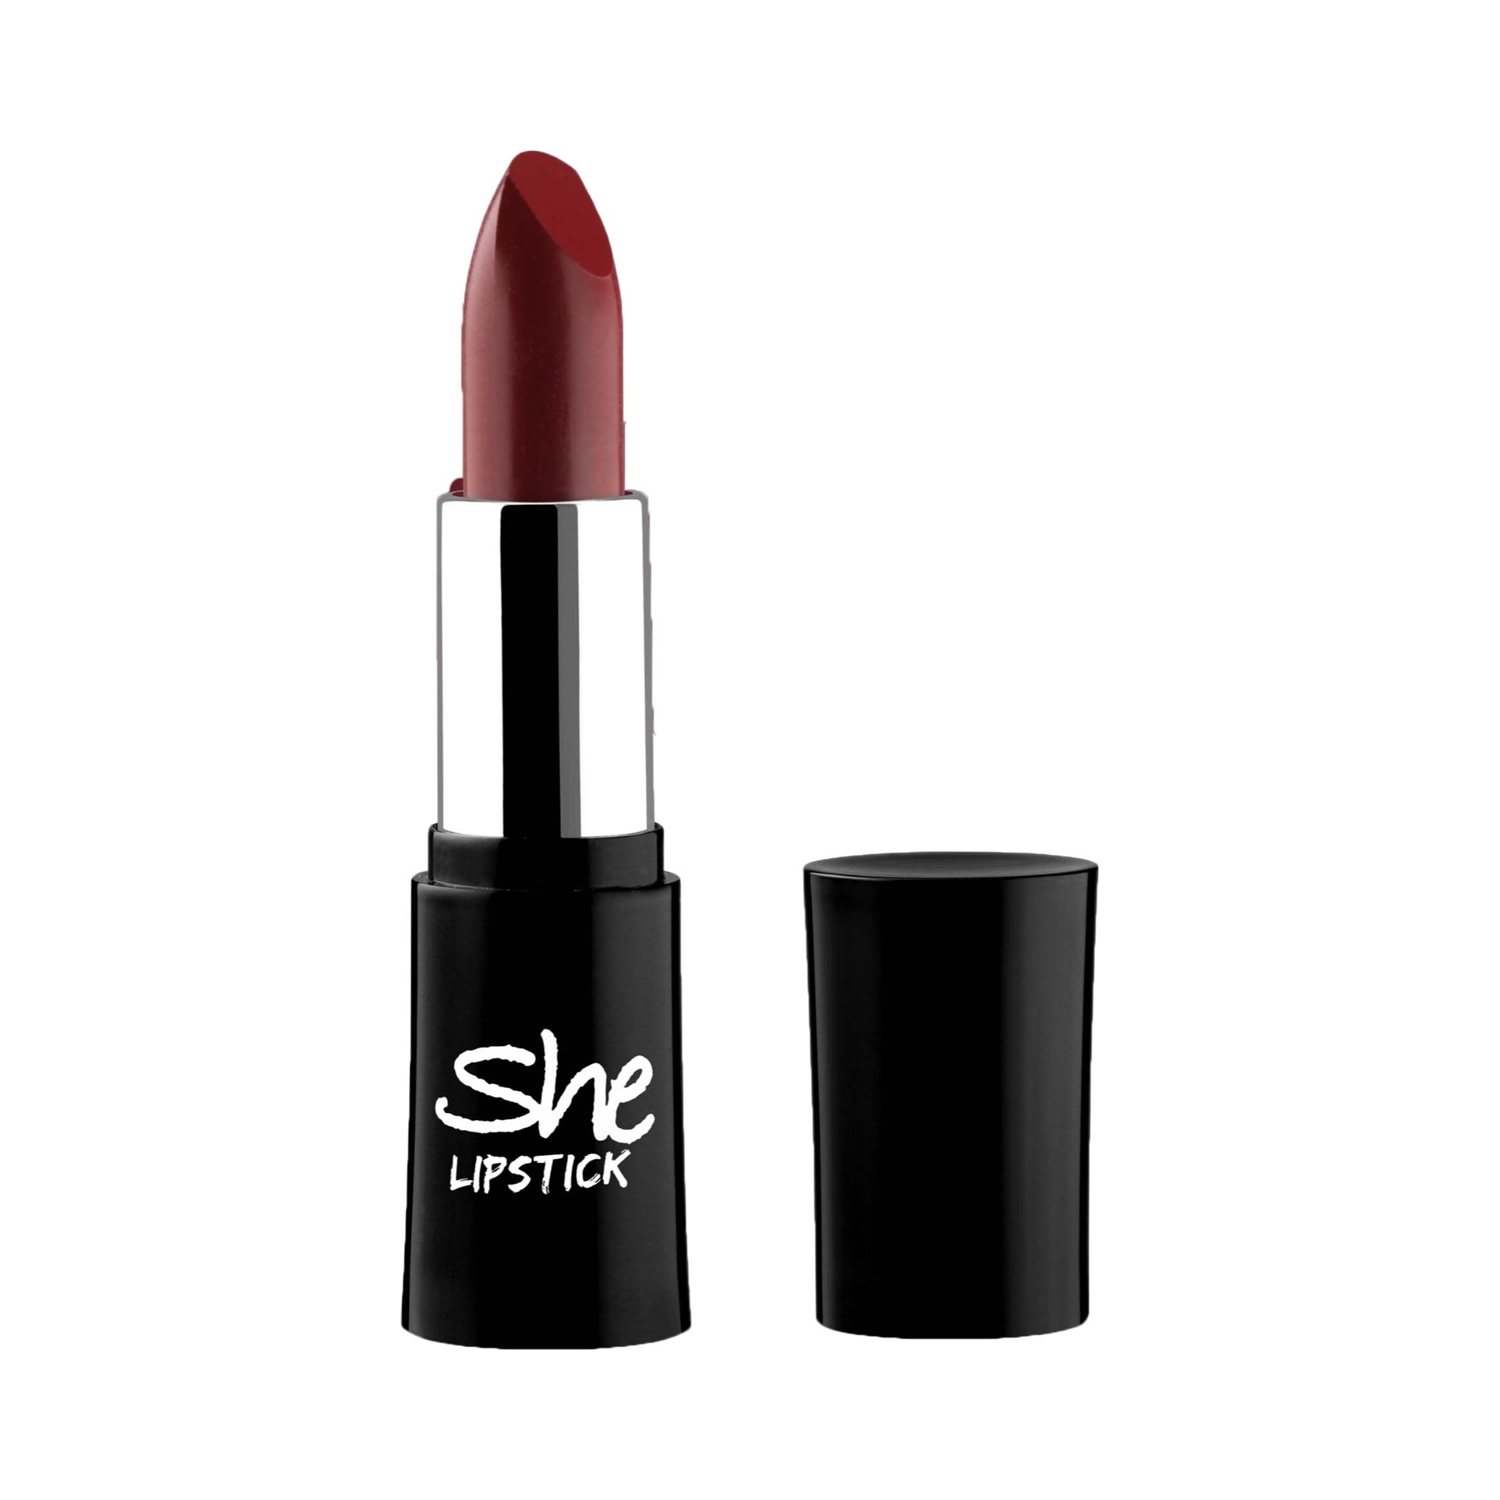 She Makeup Lipstick - 10 Roasted Brown (4.5g)